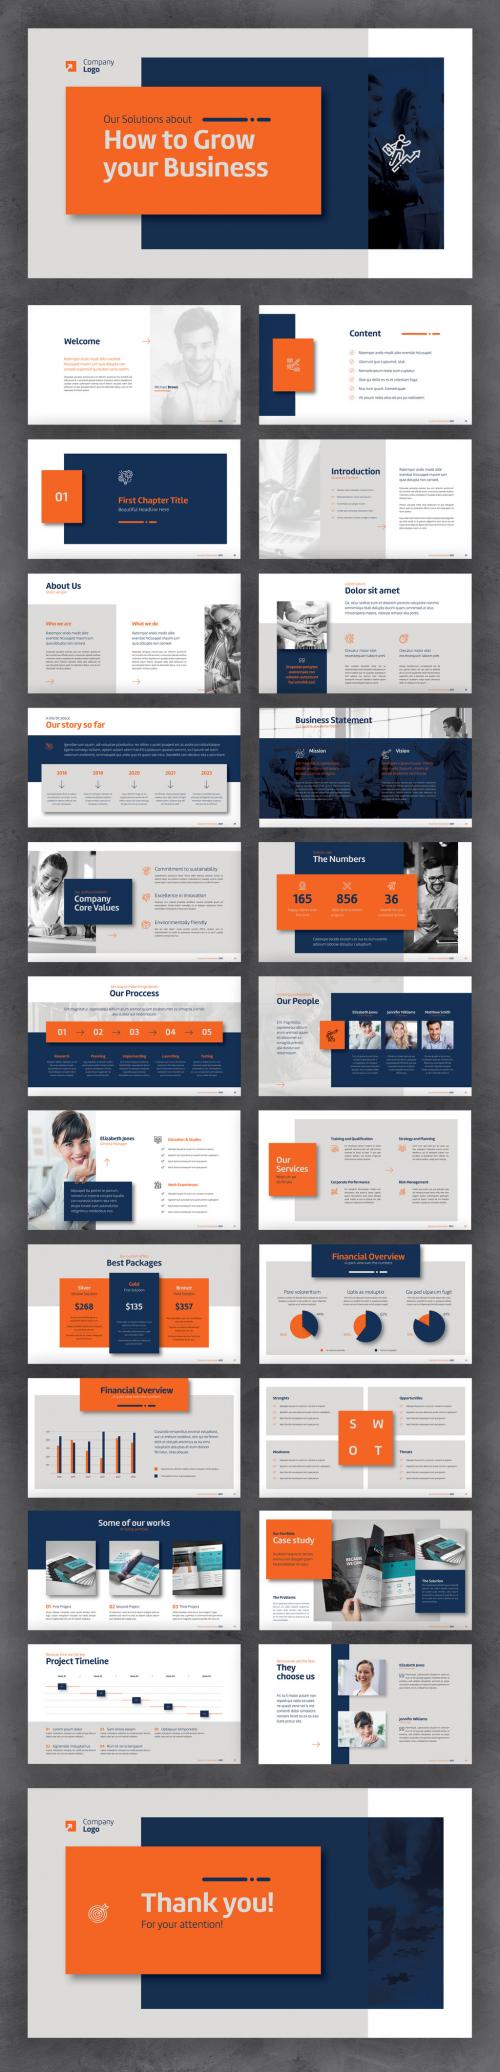 Adobe Stock - Business Profile Presentation with Blue, Orange and Gray Accents - 445642407